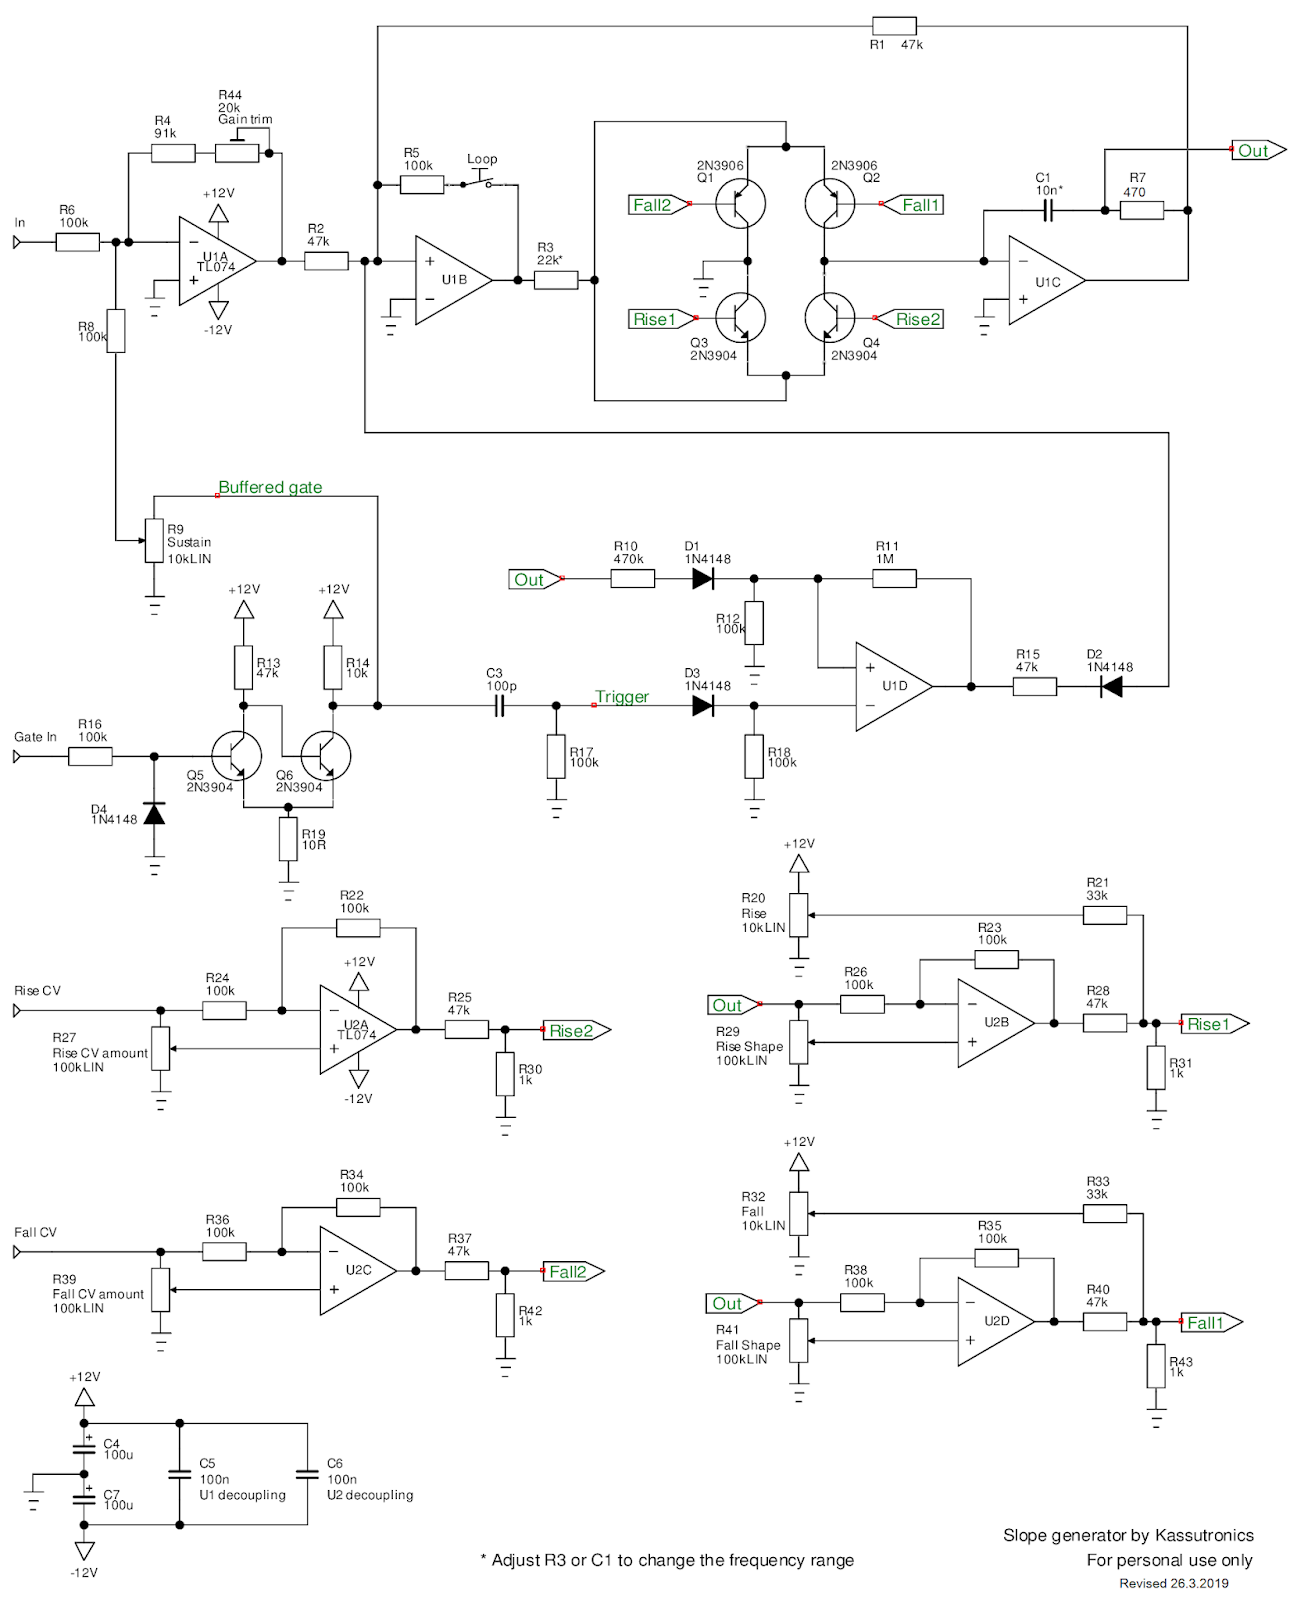 I help on this slope generator schematic : r/synthdiy